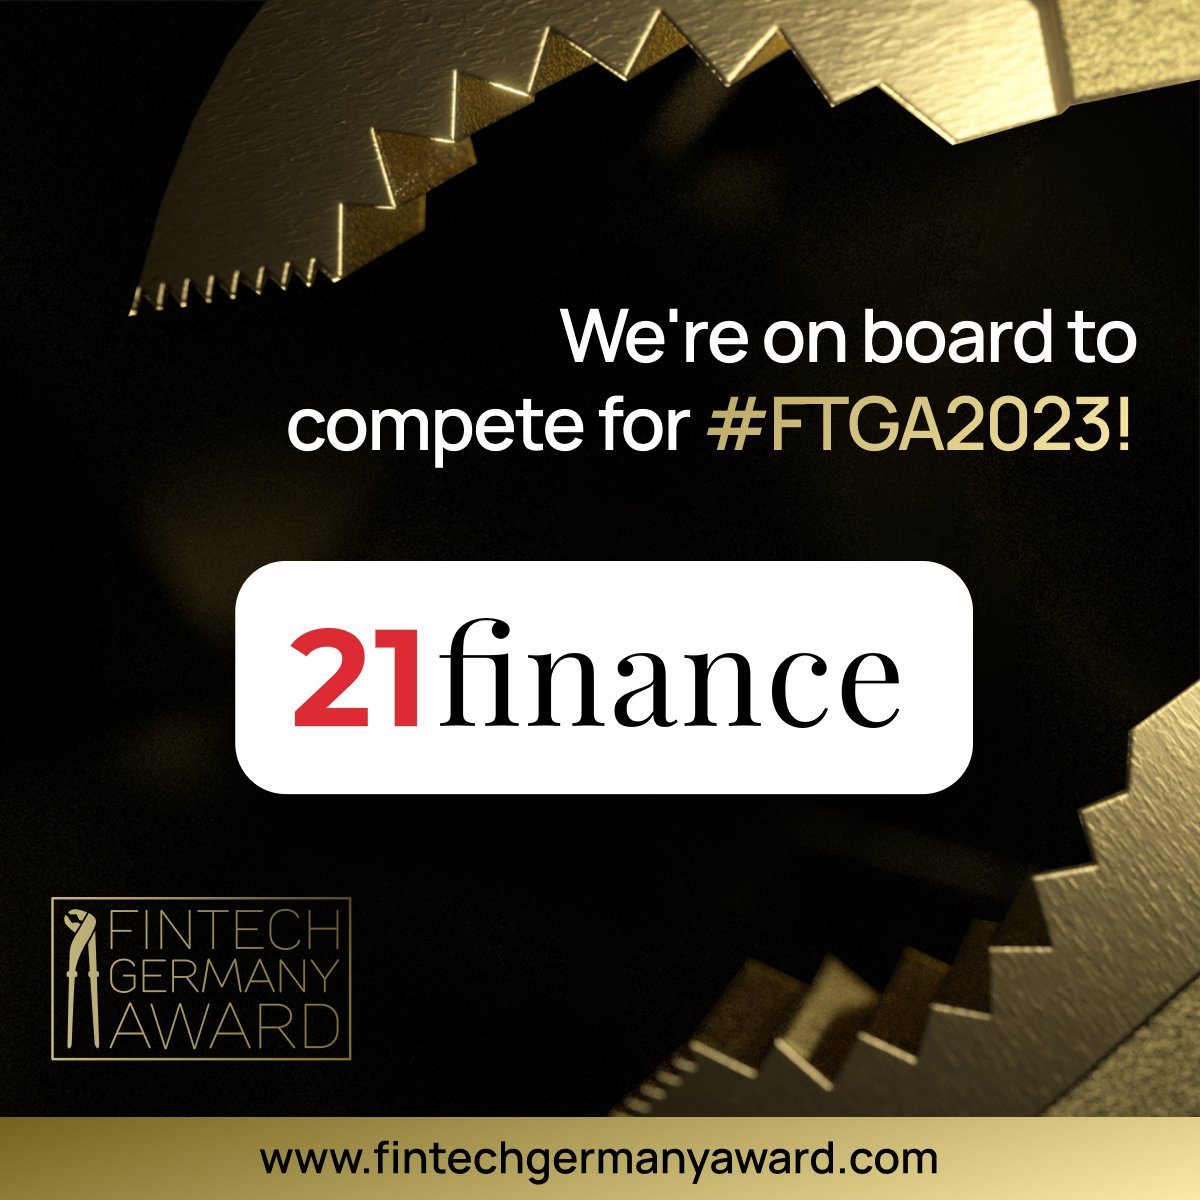 We're on the Fintech Germany Award 2023 longlist, recognizing the best fintech startups in Germany!
Stay tuned for updates as we continue to innovate and make our mark in the fintech industry!

#FTGA #FTGA2023 #Sponsor #Scaleups #Awards #Fintech #Insurtech